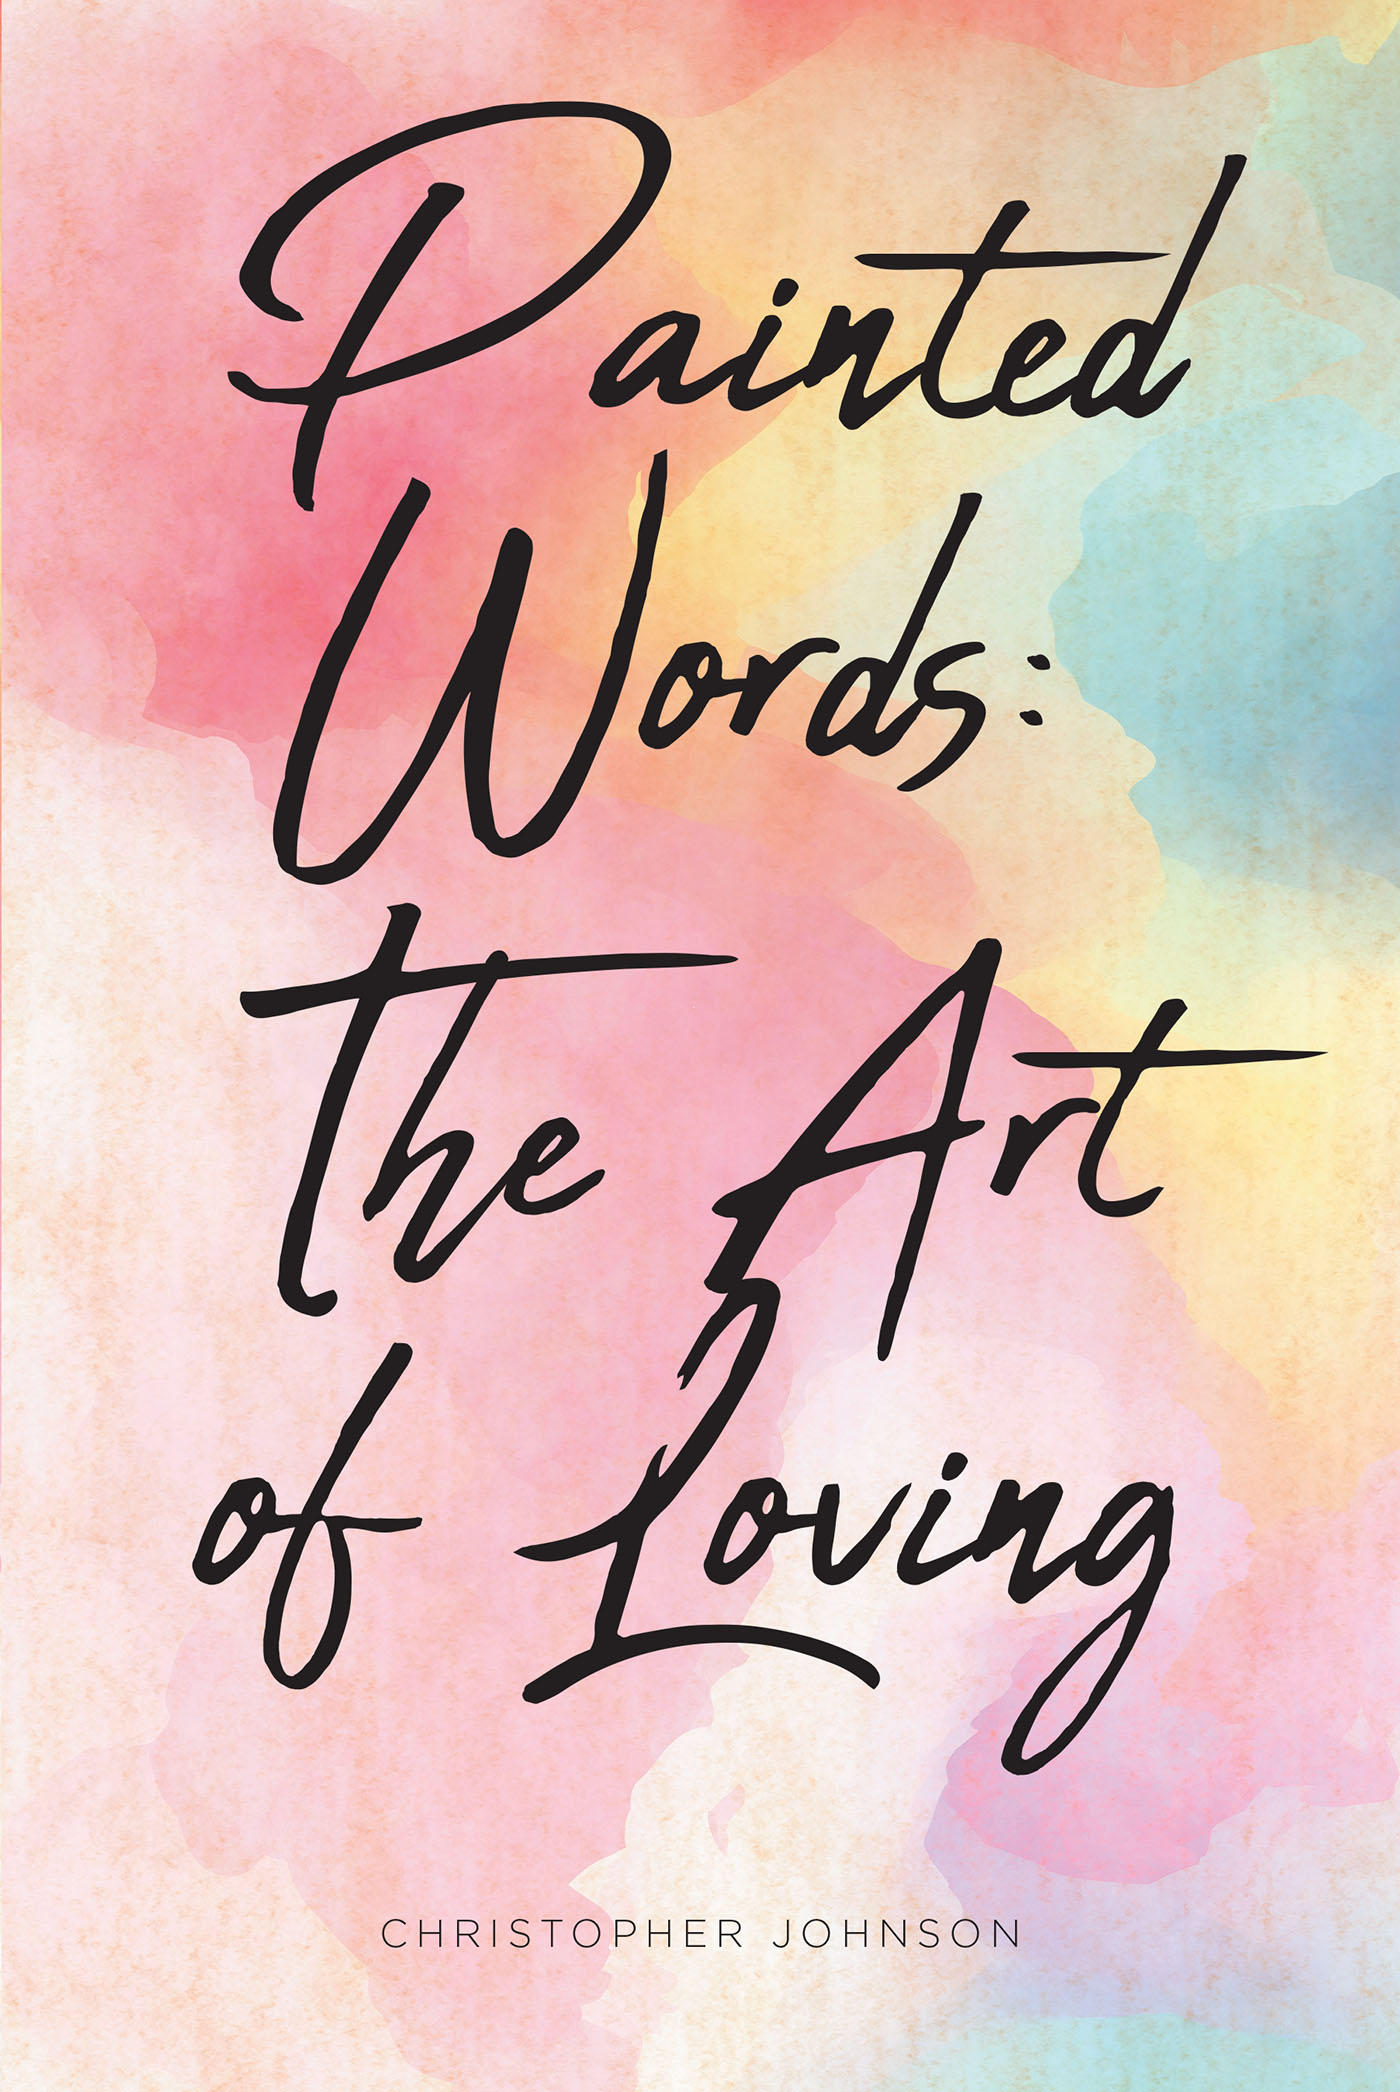 Christopher Johnson’s Newly Released “Painted Words: The Art of Loving” is a Thought-Provoking Inspirational That Will Challenge and Empower the Spirit